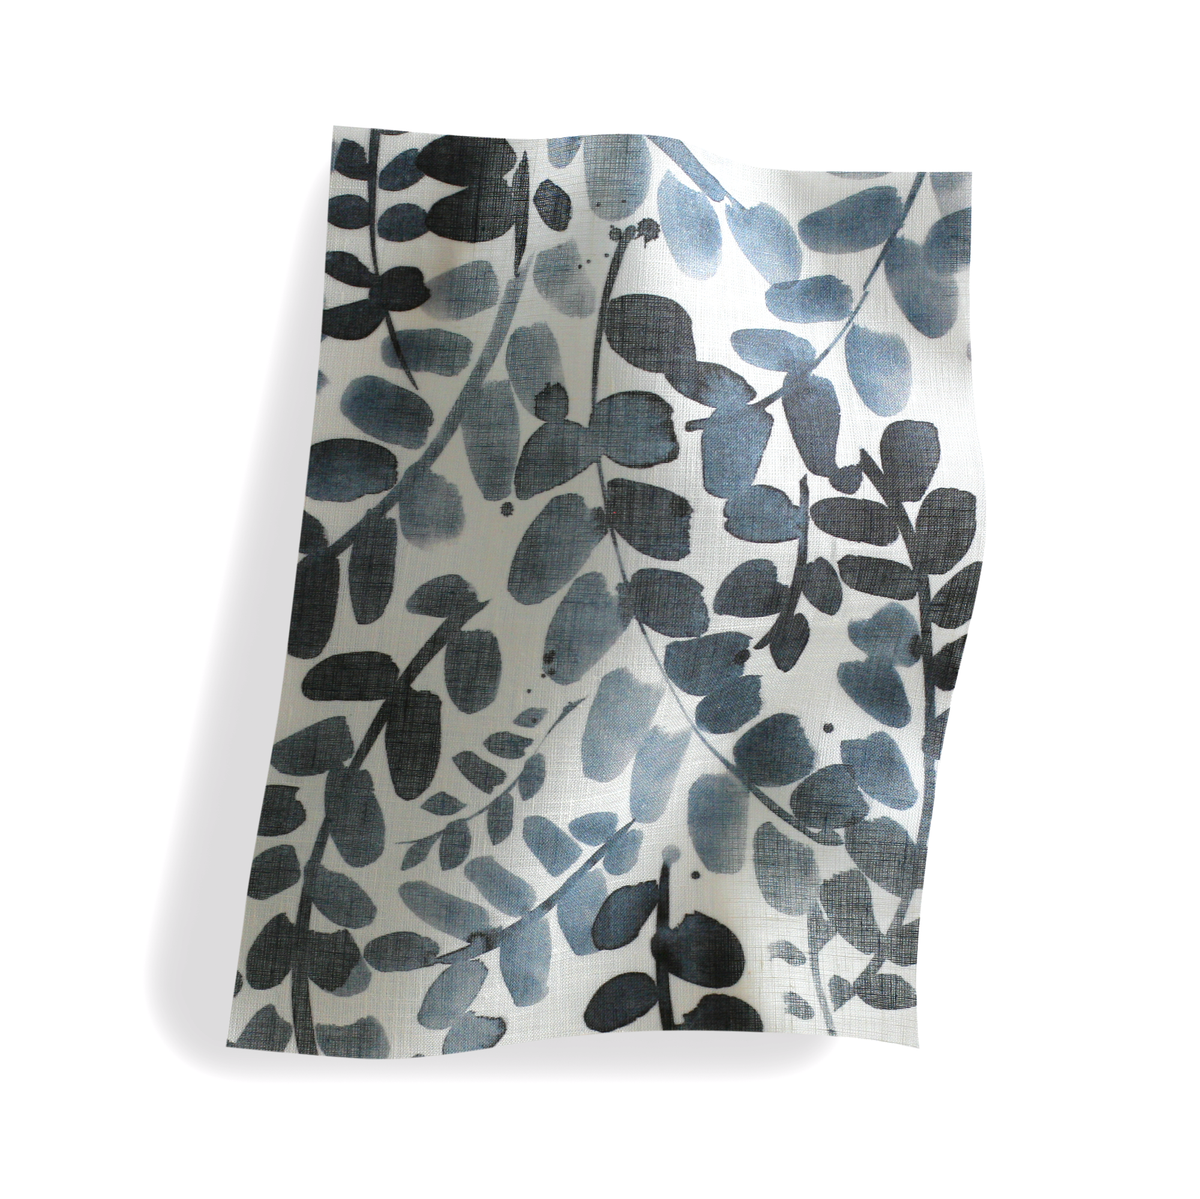 Leafy Vines Fabric in Navy